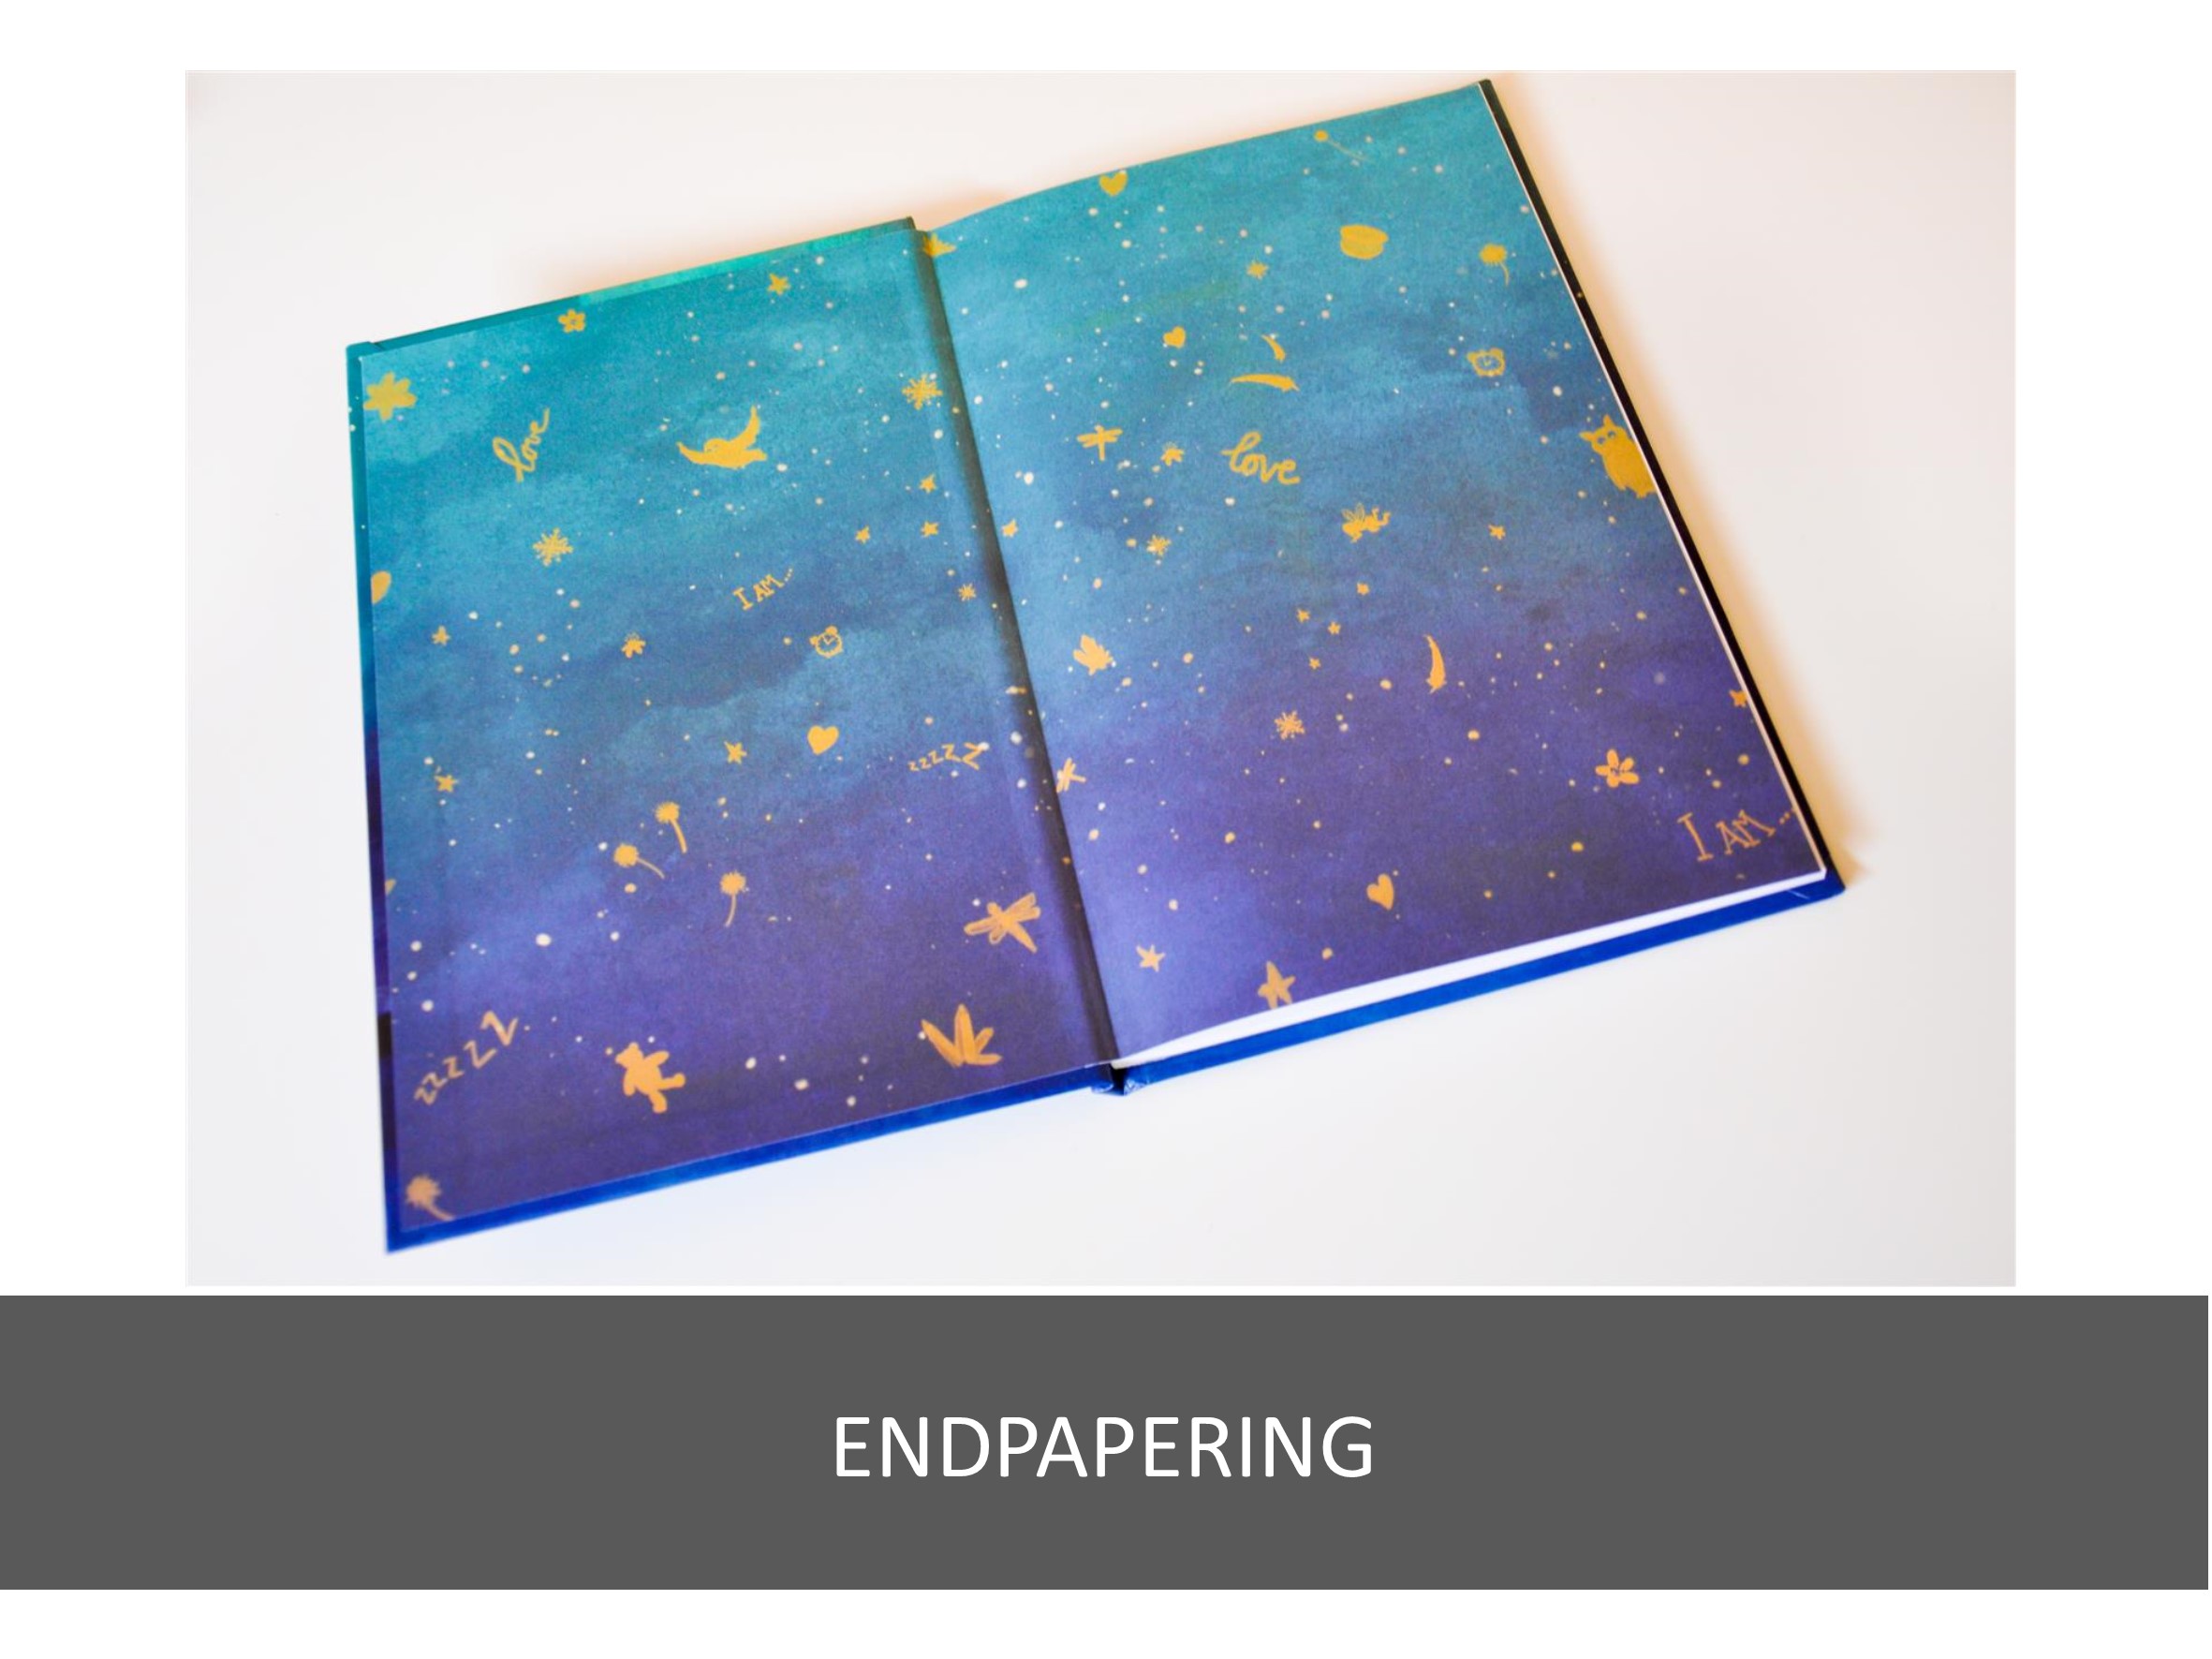 Endpapering